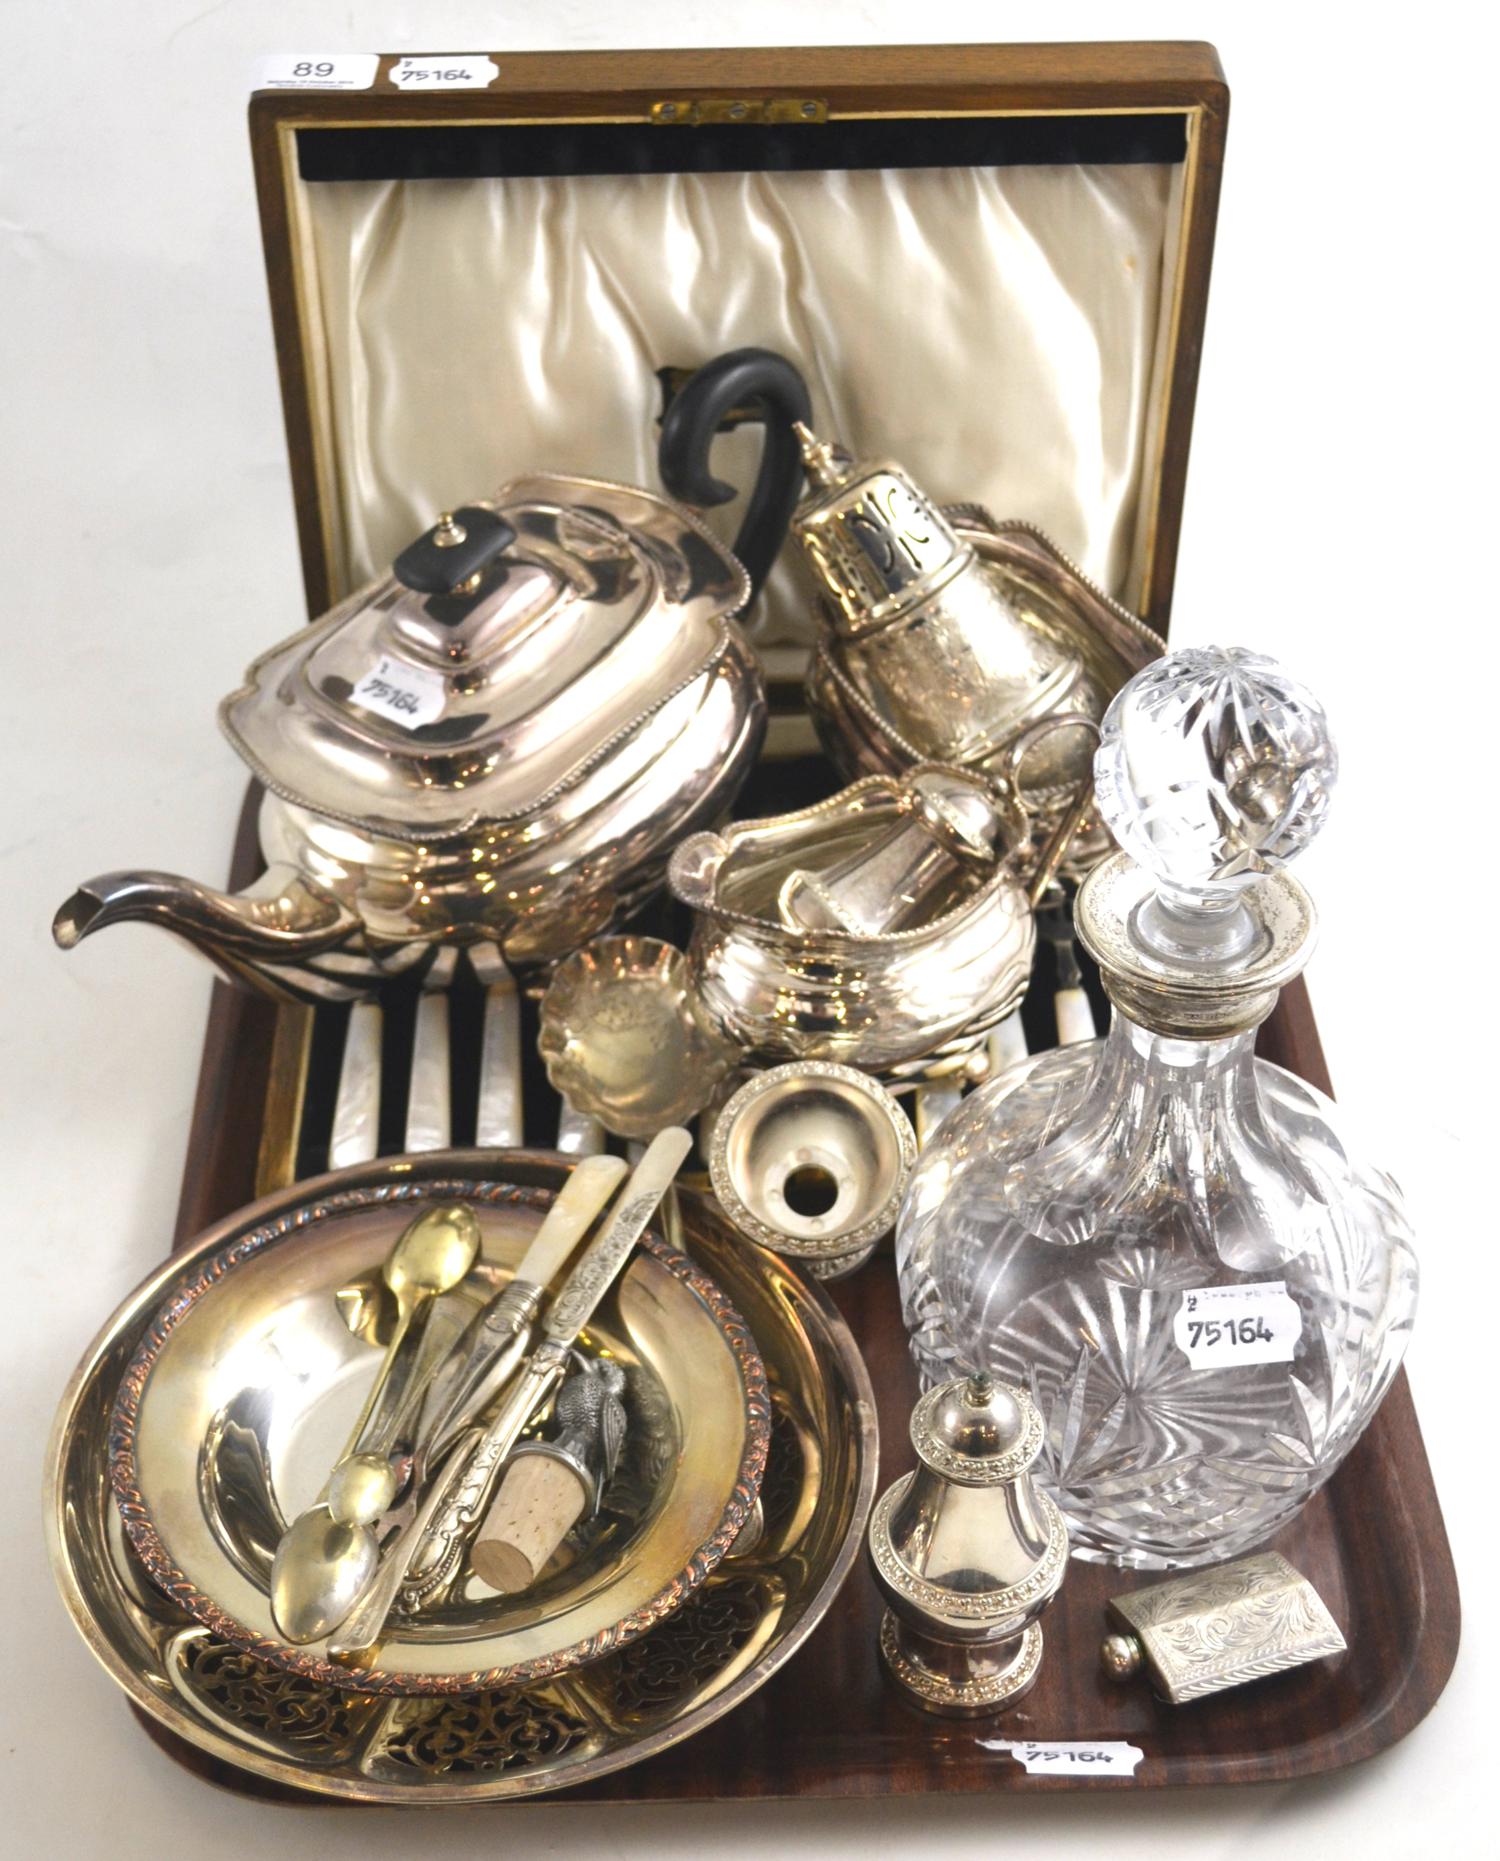 A quantity of silver and silver plate including a silver collared decanter, silver spoon, silver